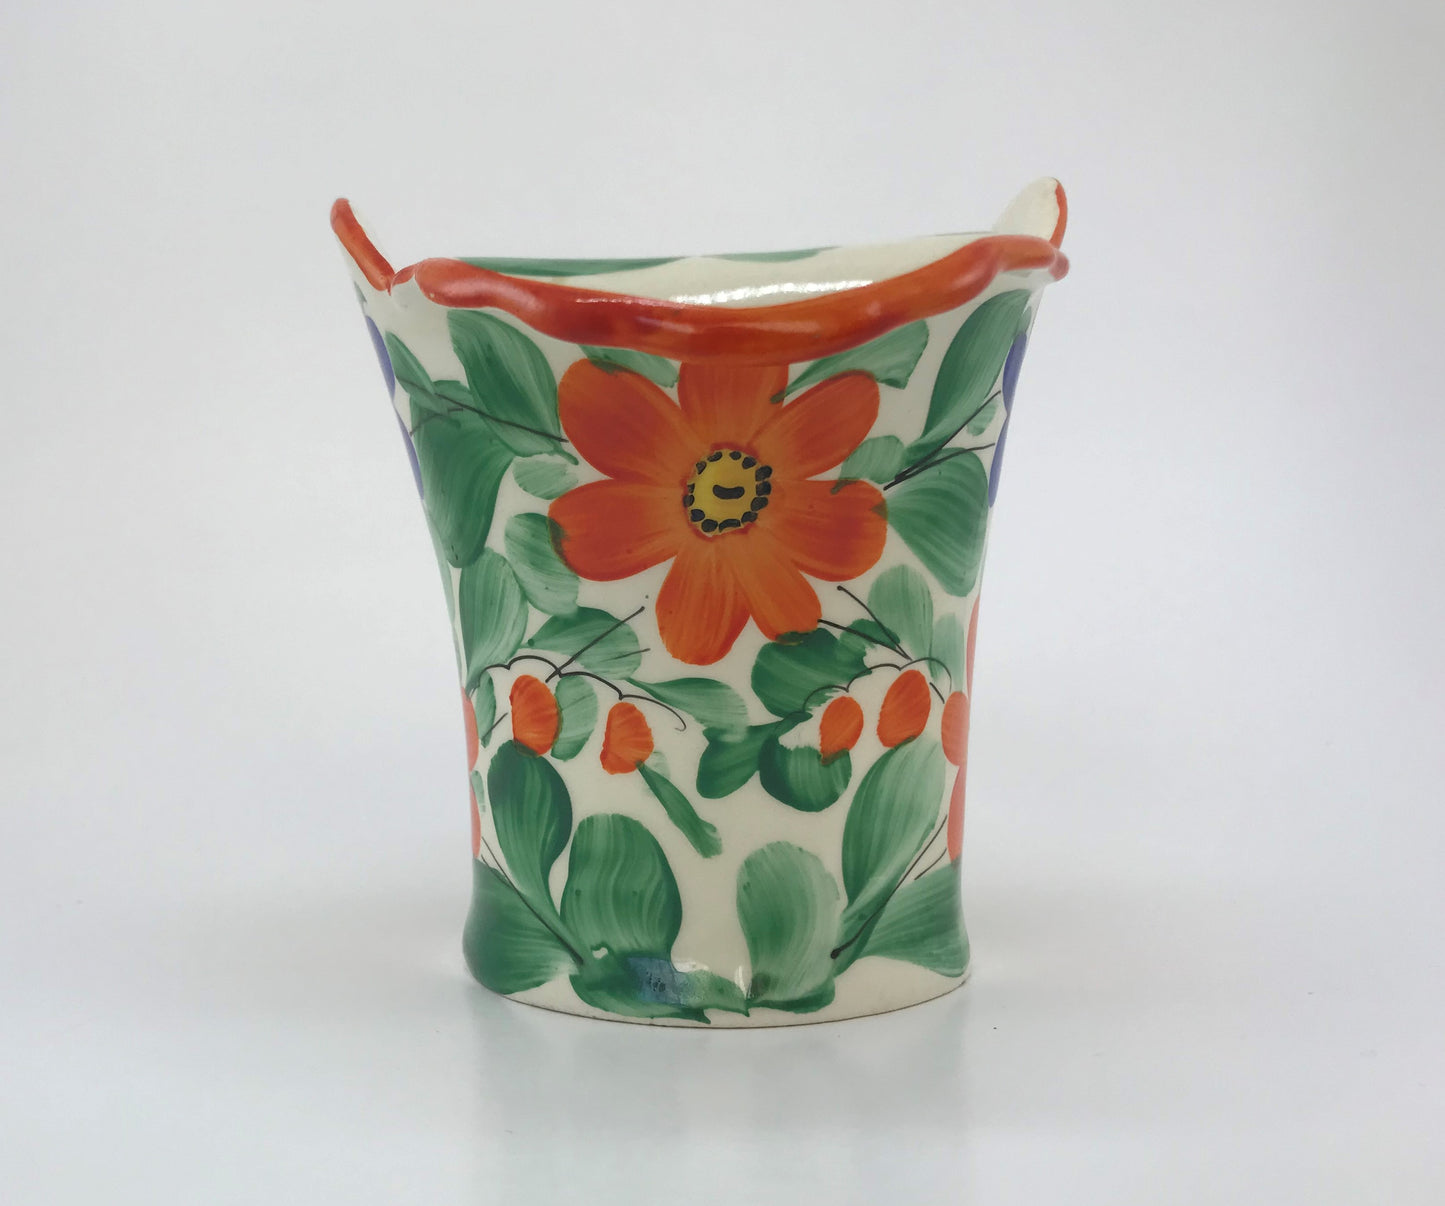 Czechoslovakian Fluted Vase with Hand-painted Flowers, 1920s